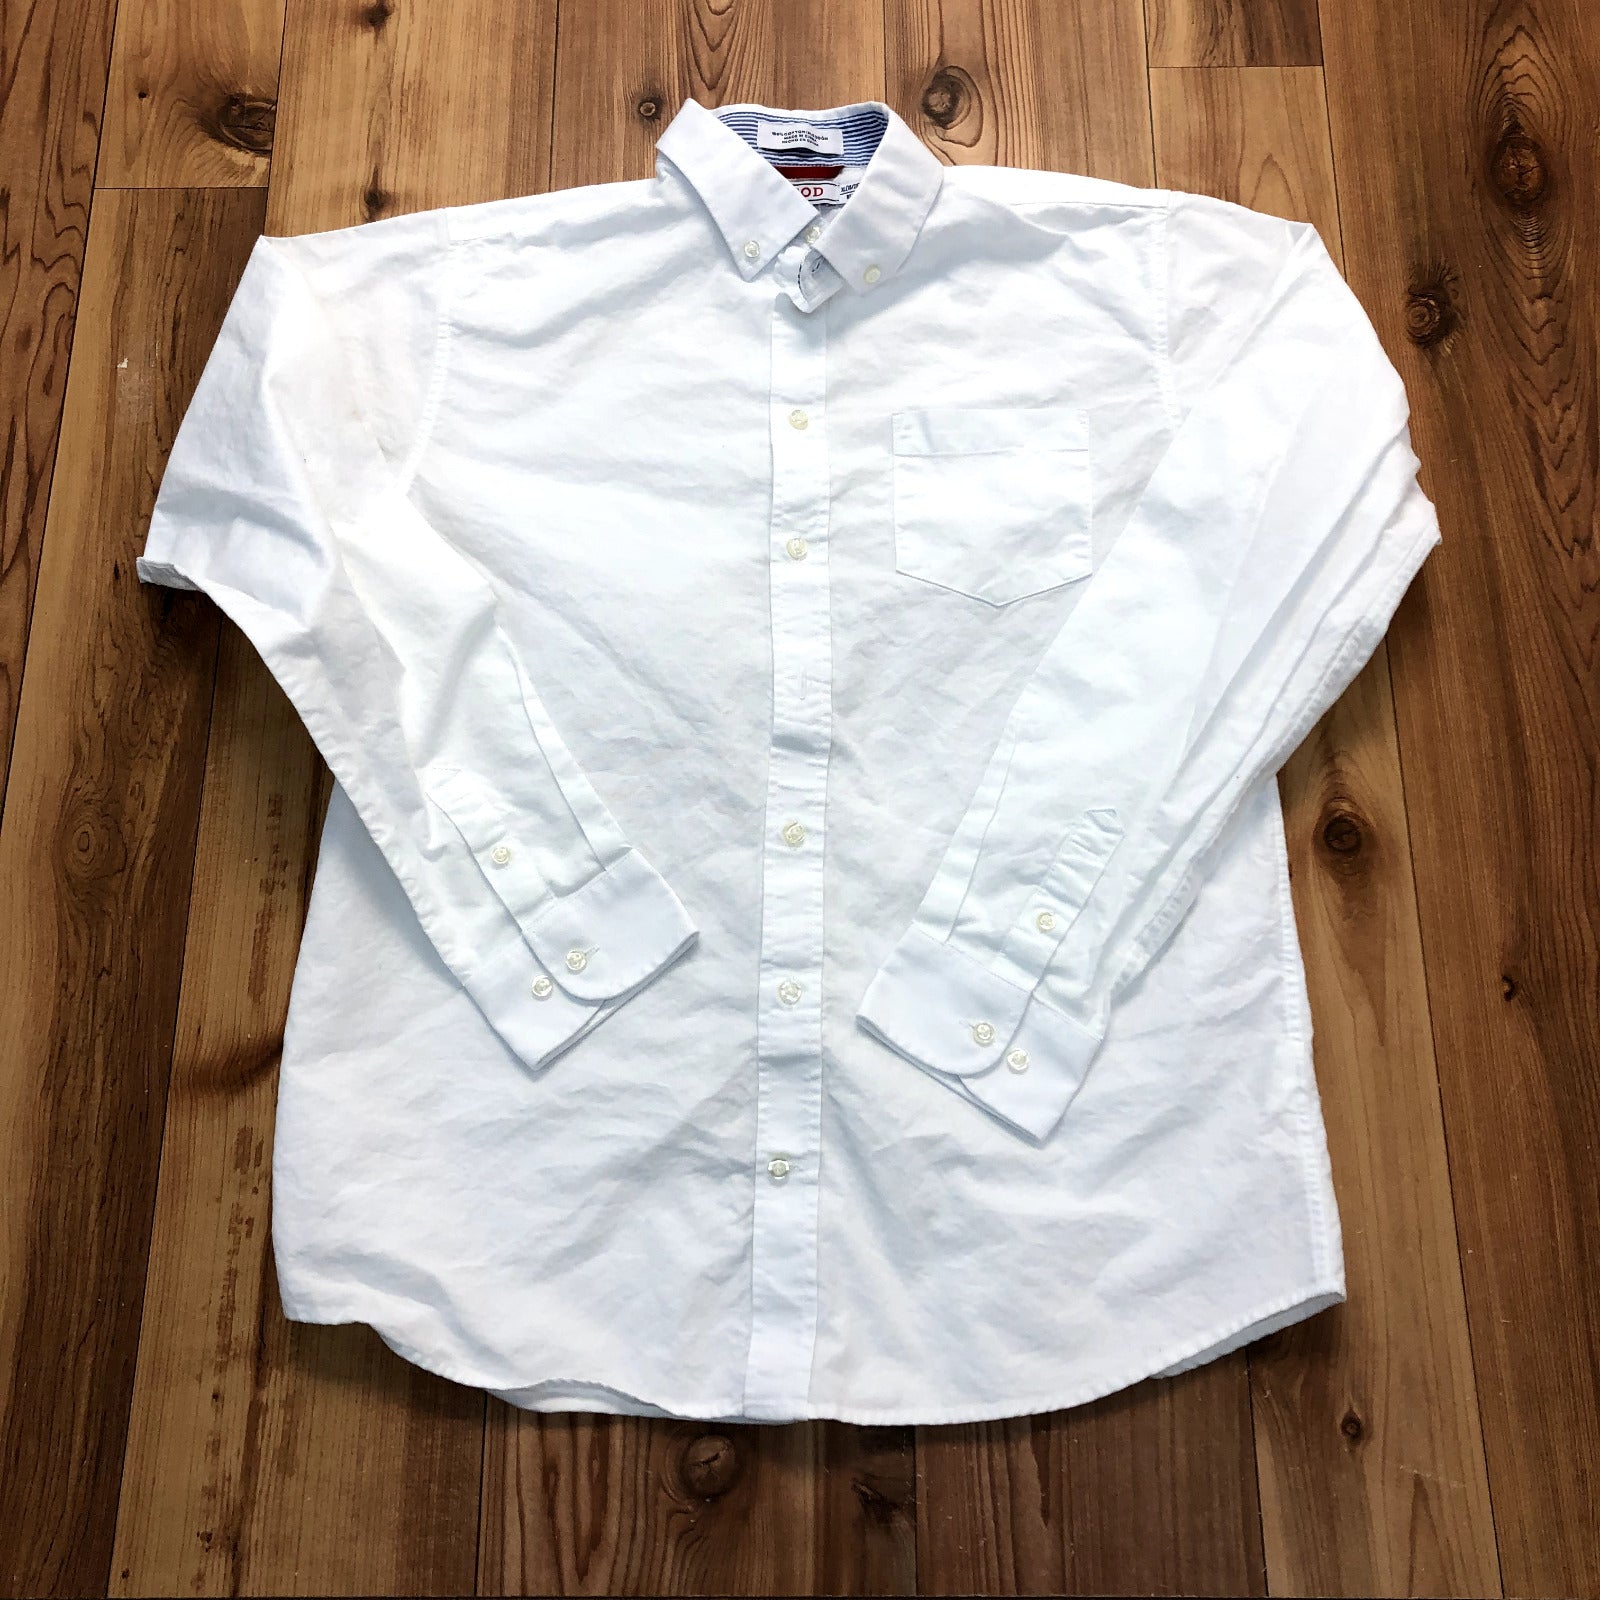 IZOD White Solid Regular Fit Single Pocket Cotton Button Up Shirt Youth Size XL